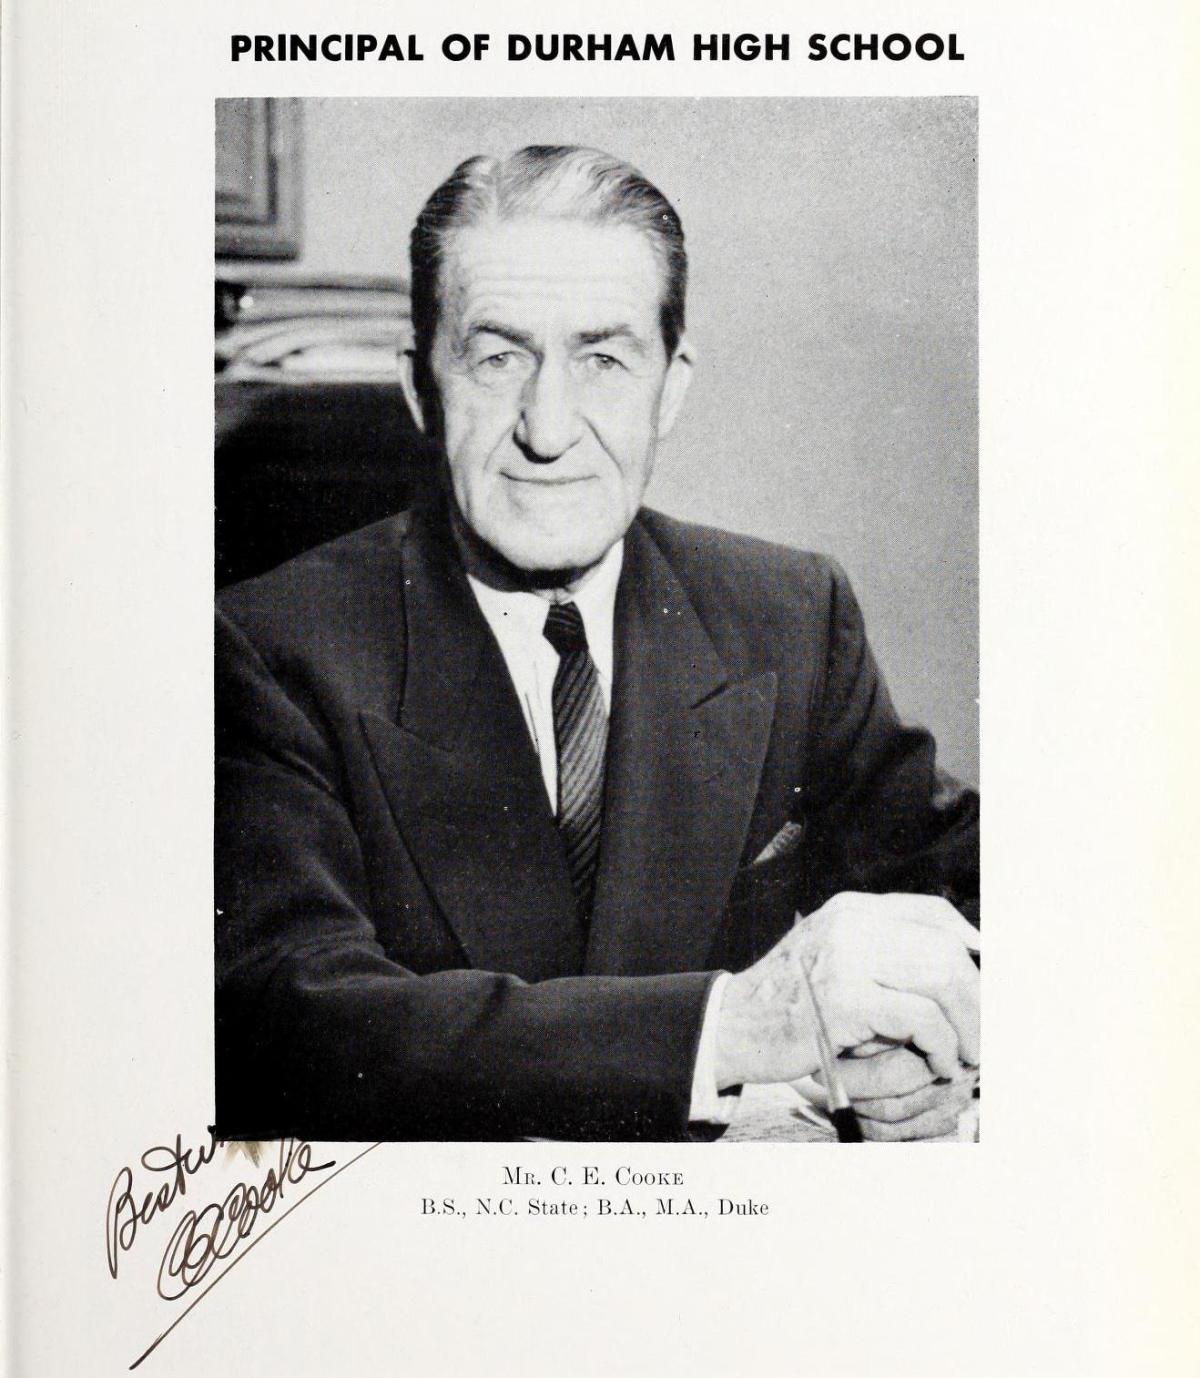 1957 yearbook photo of Durham High School principal, Cecil Cooke.